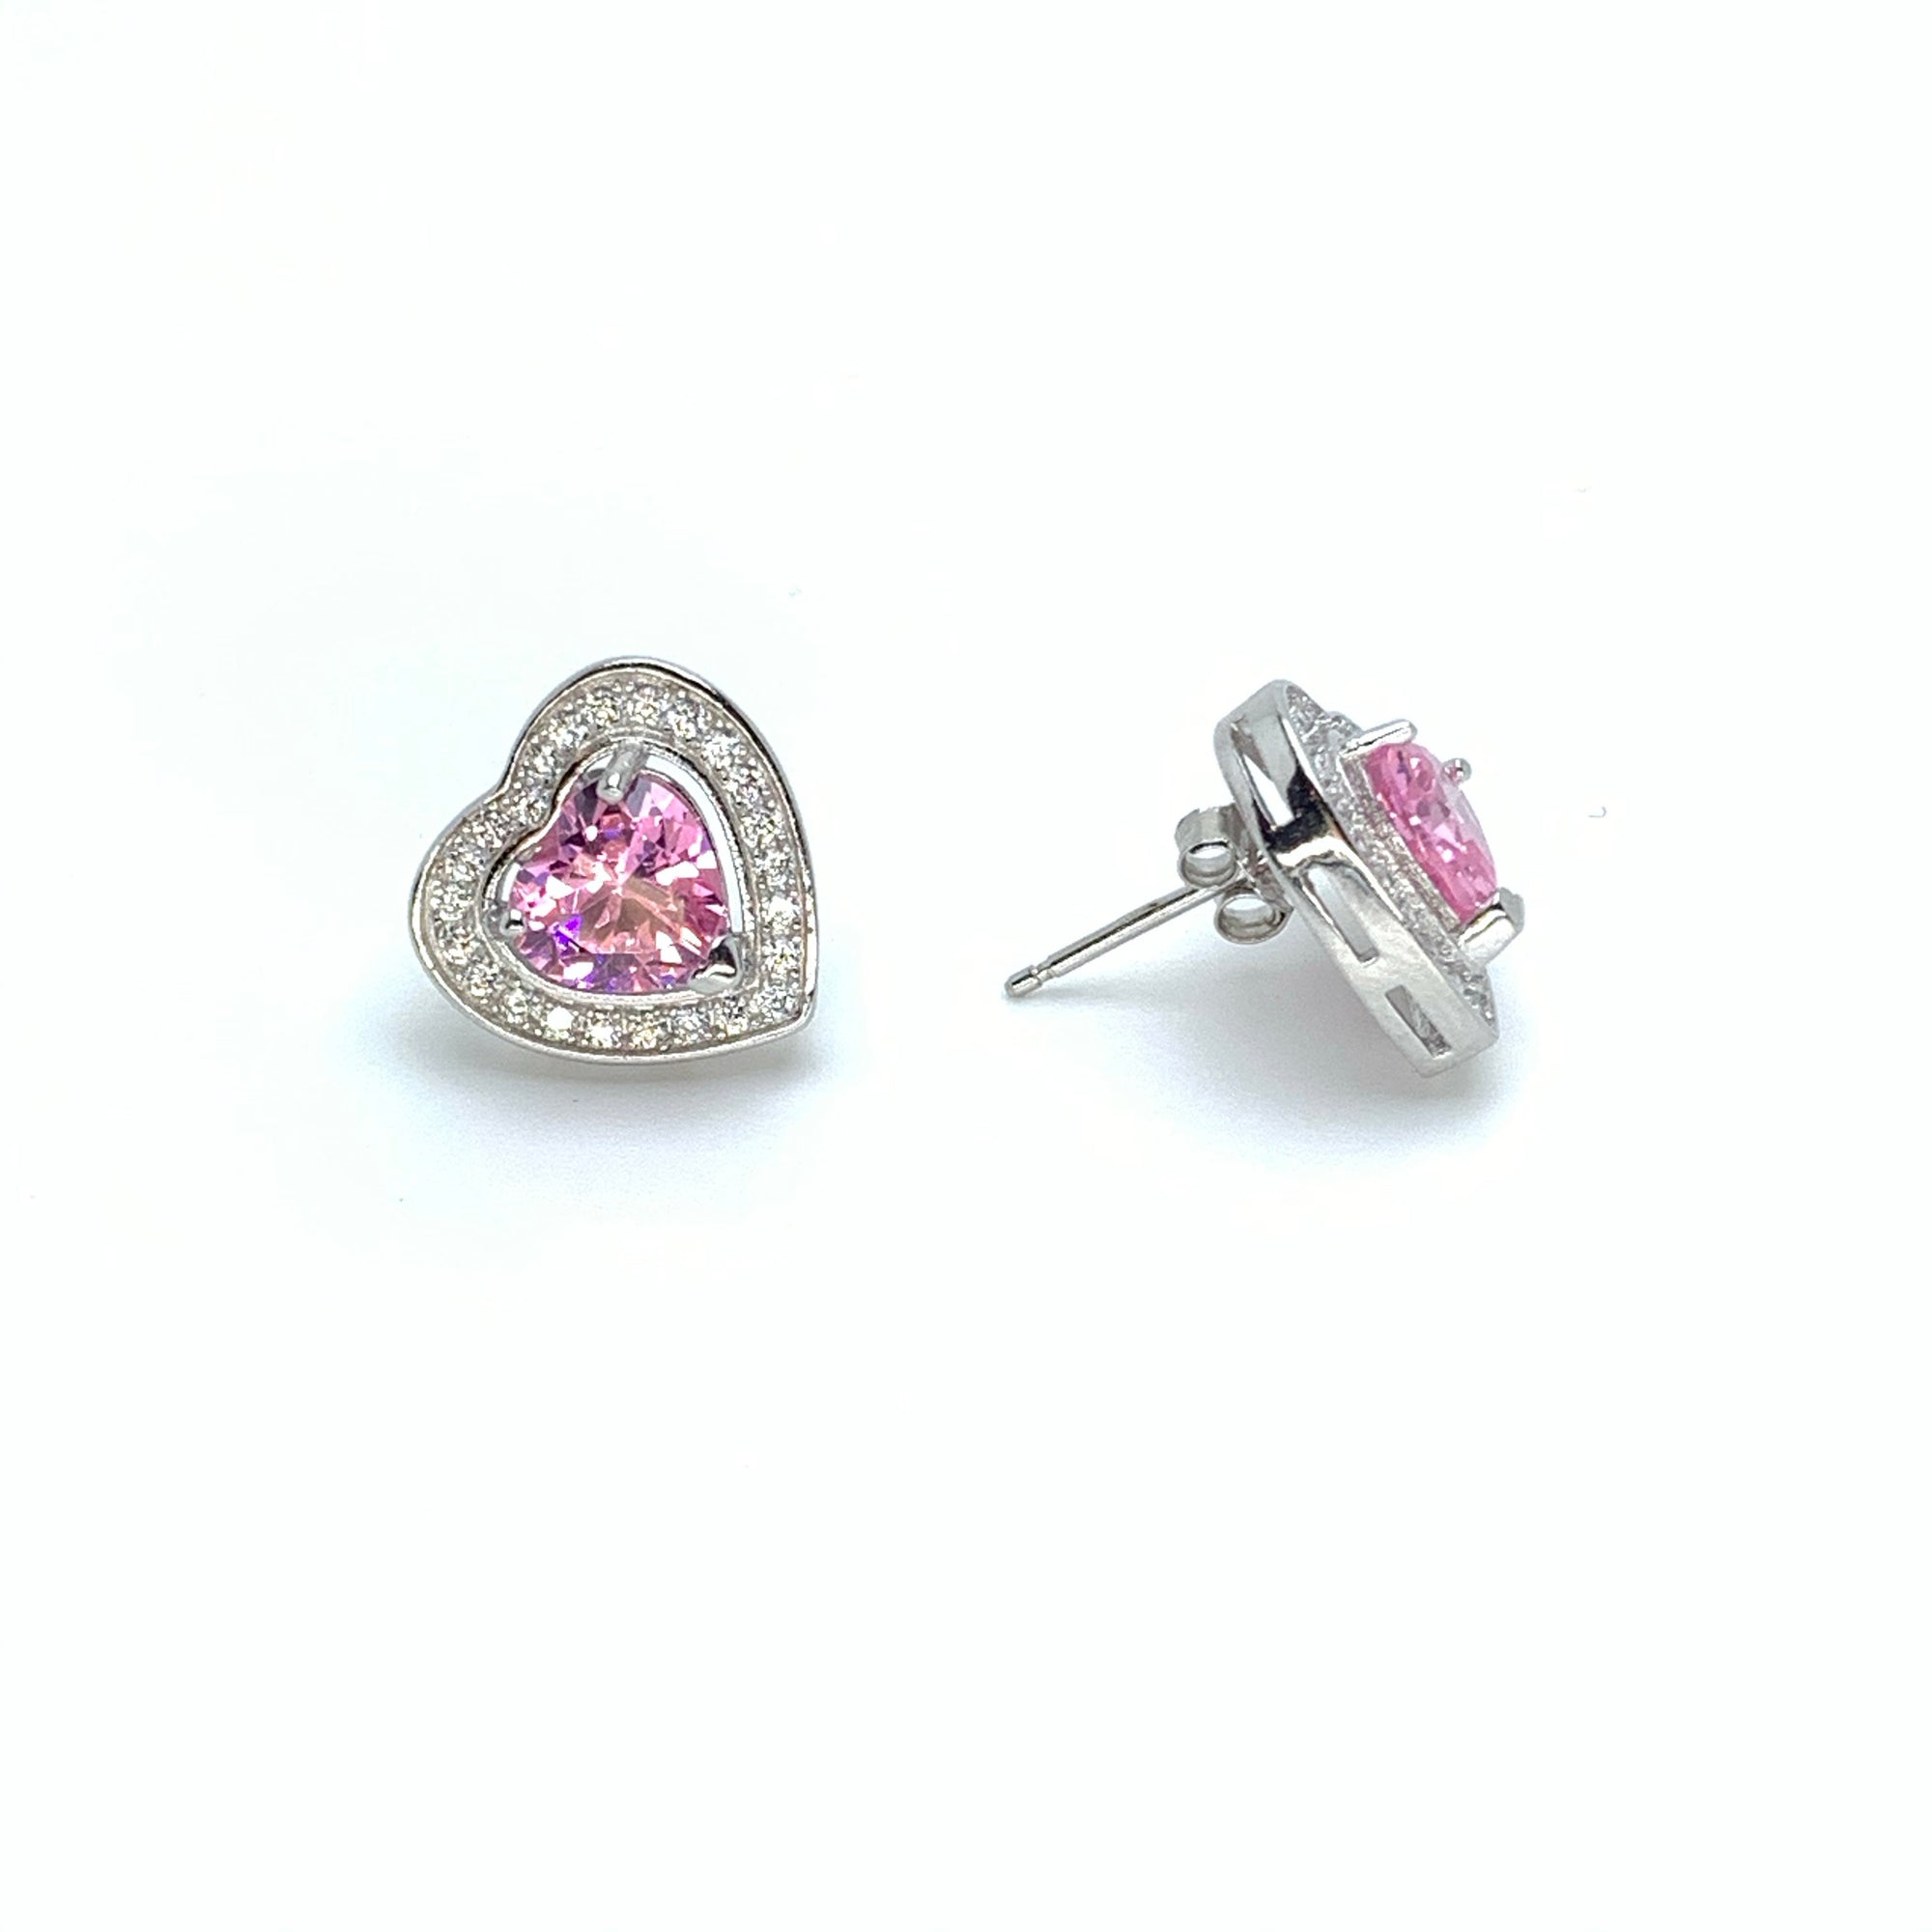 Heart Shaped Silver Pink And White Studs 